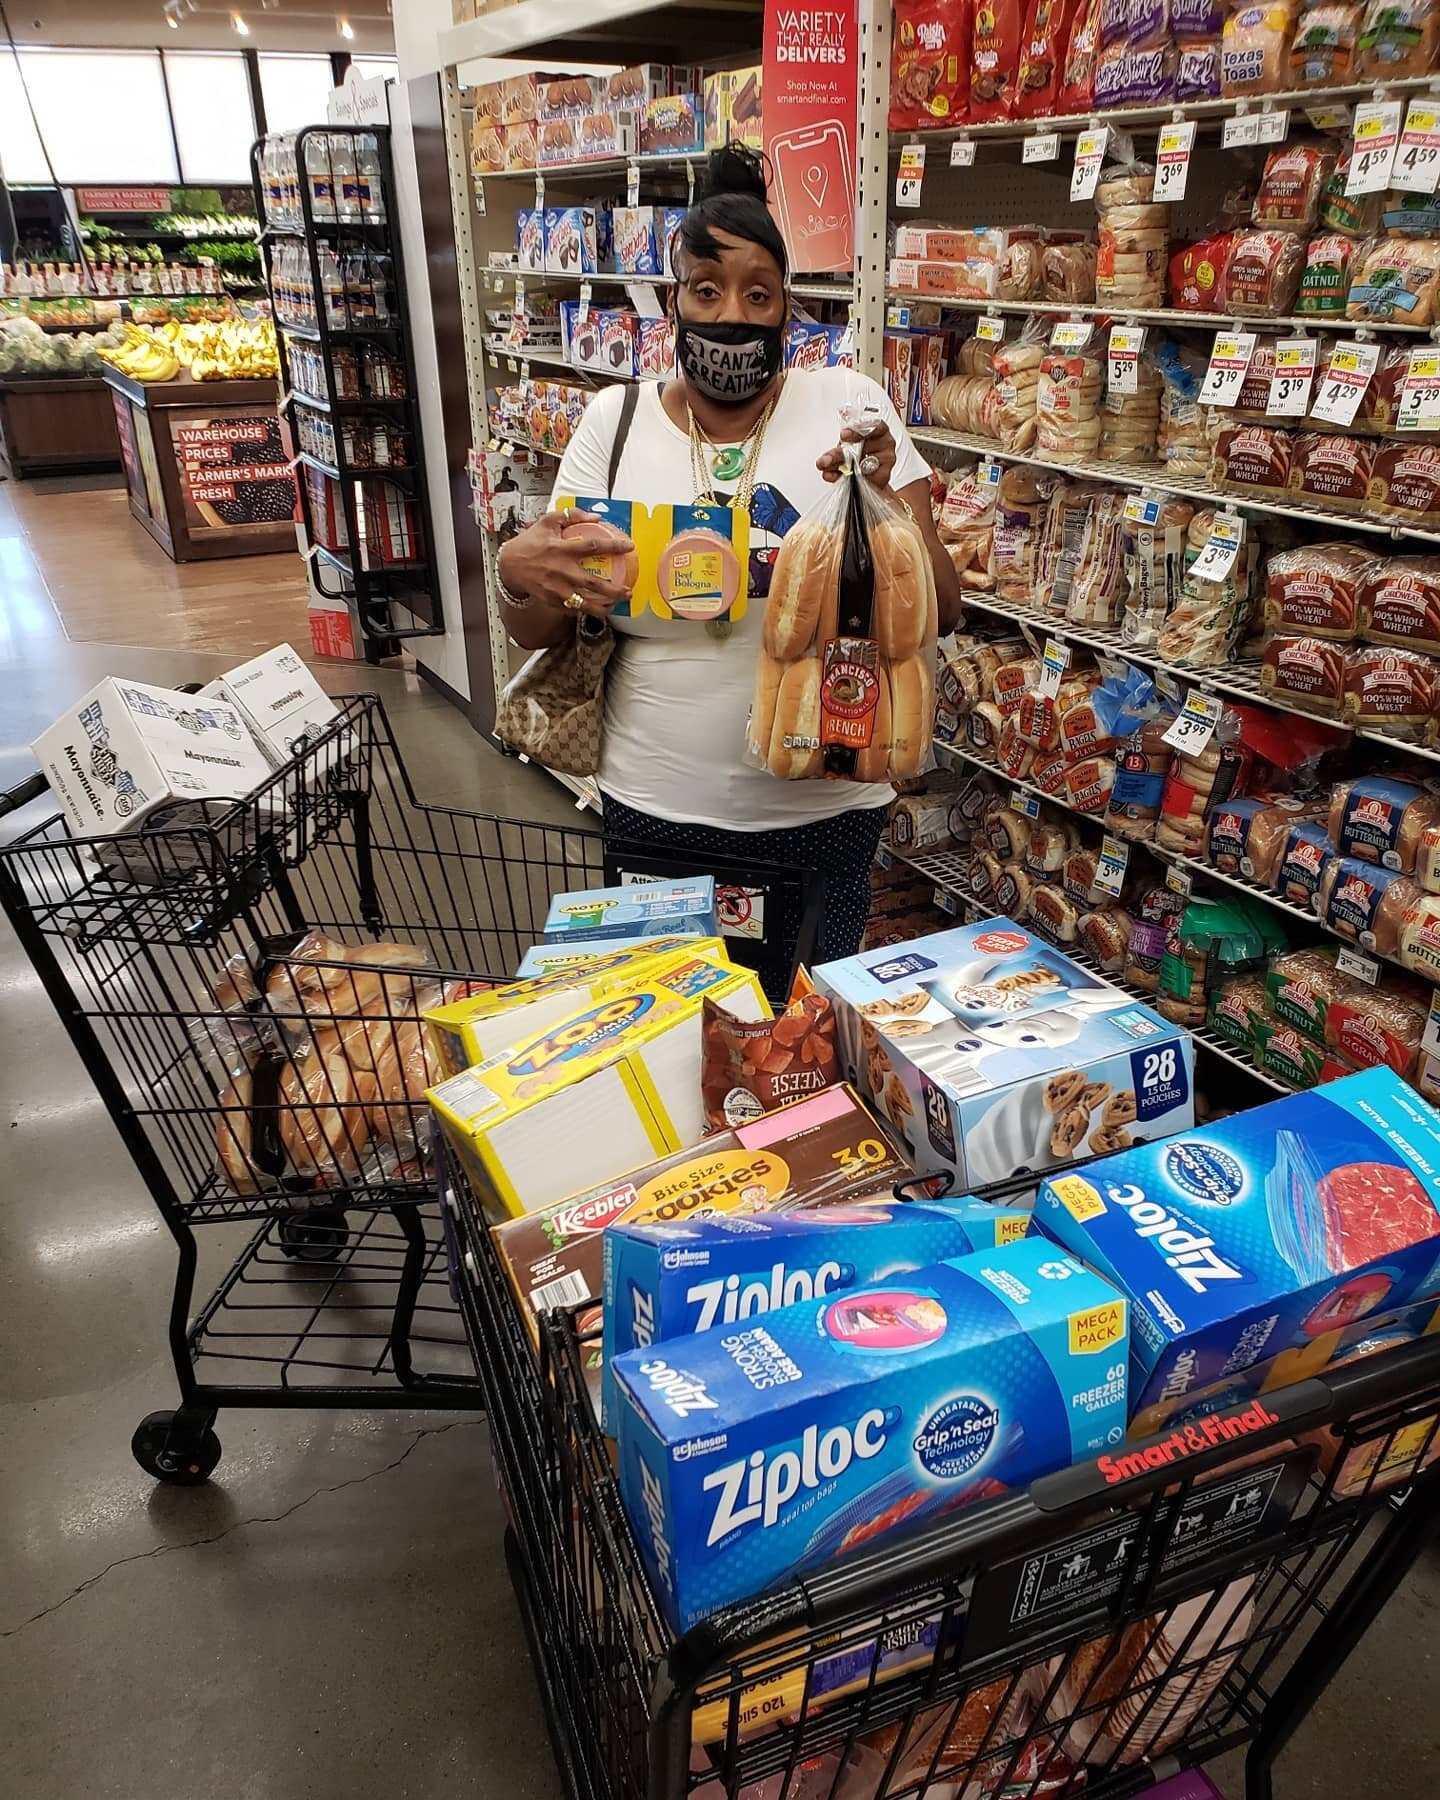 BIG RODNEY &amp; I JUST FINISH GROCERY SHOPPING TO FEED THE HOMELESS. WE LOVE HELPING OUT WITH OUR COMMUNITY. #URBLESSINGS I would like to thank #successcenter #ZuniCafe #mayorsoffice #minniebells #peachespatties #chefronspastries #africanamericanart